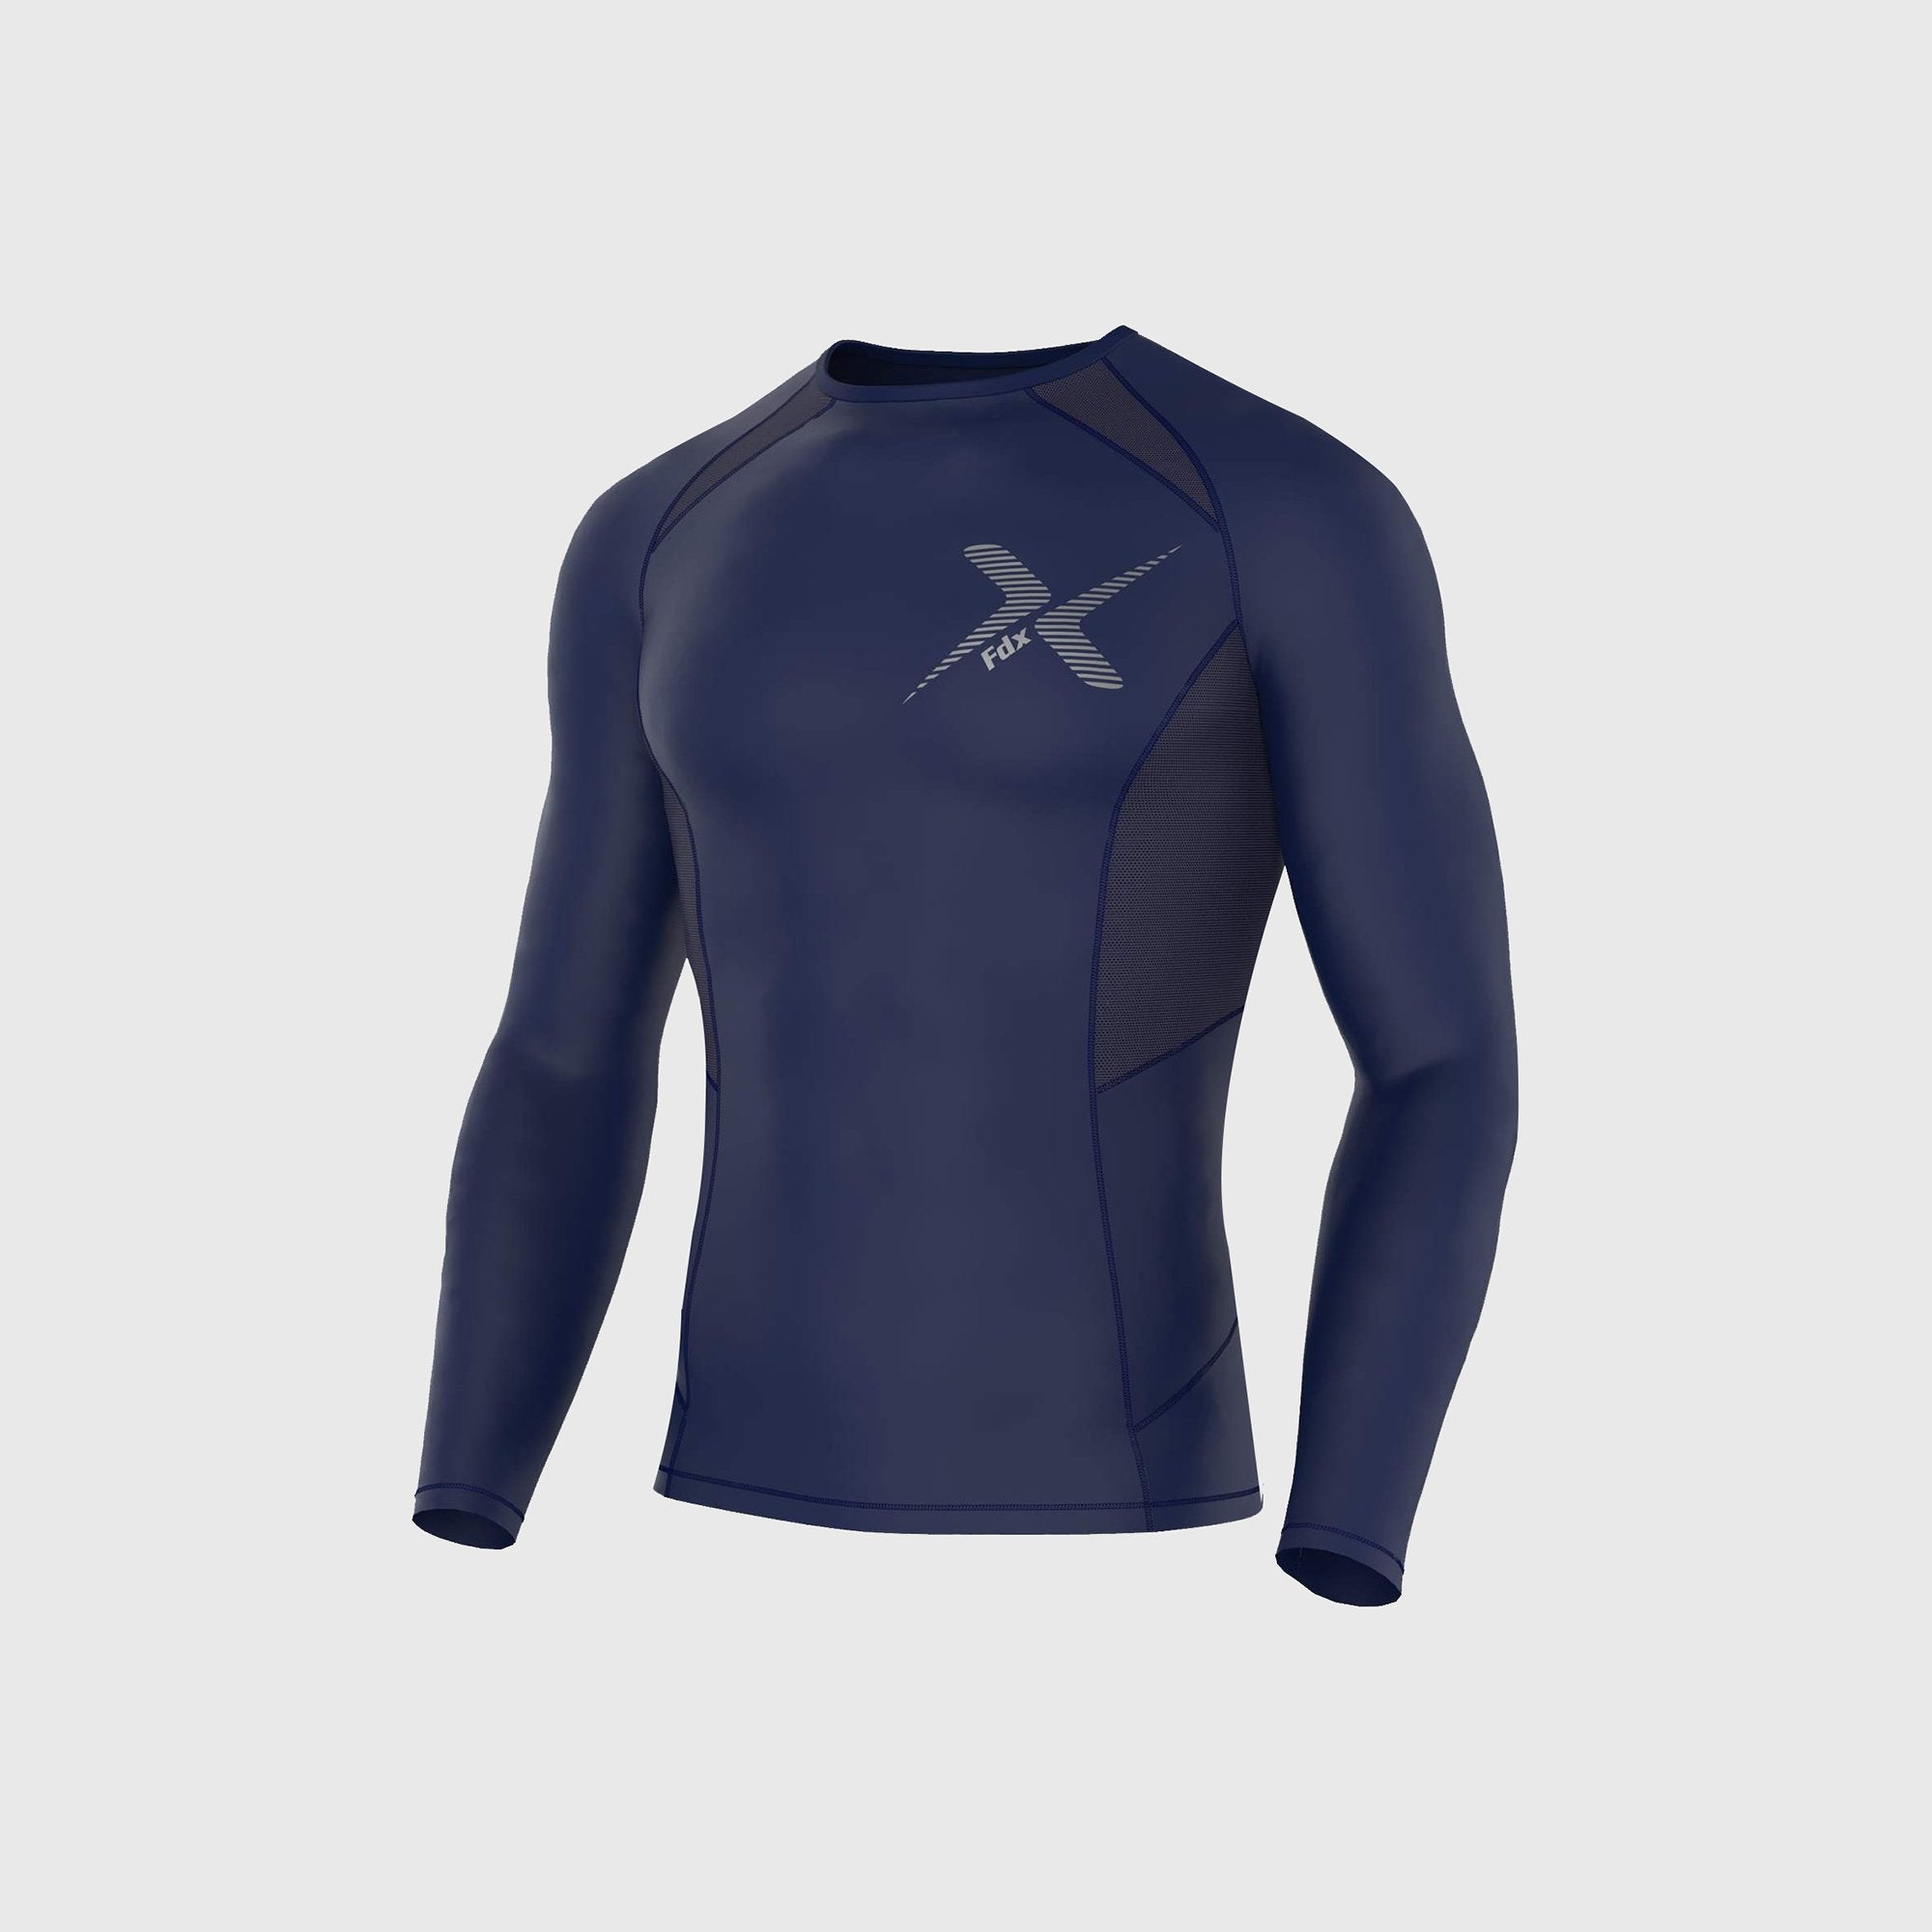 Fdx Recoil Men's Full Sleeves Thermal Base Layer Top Blue